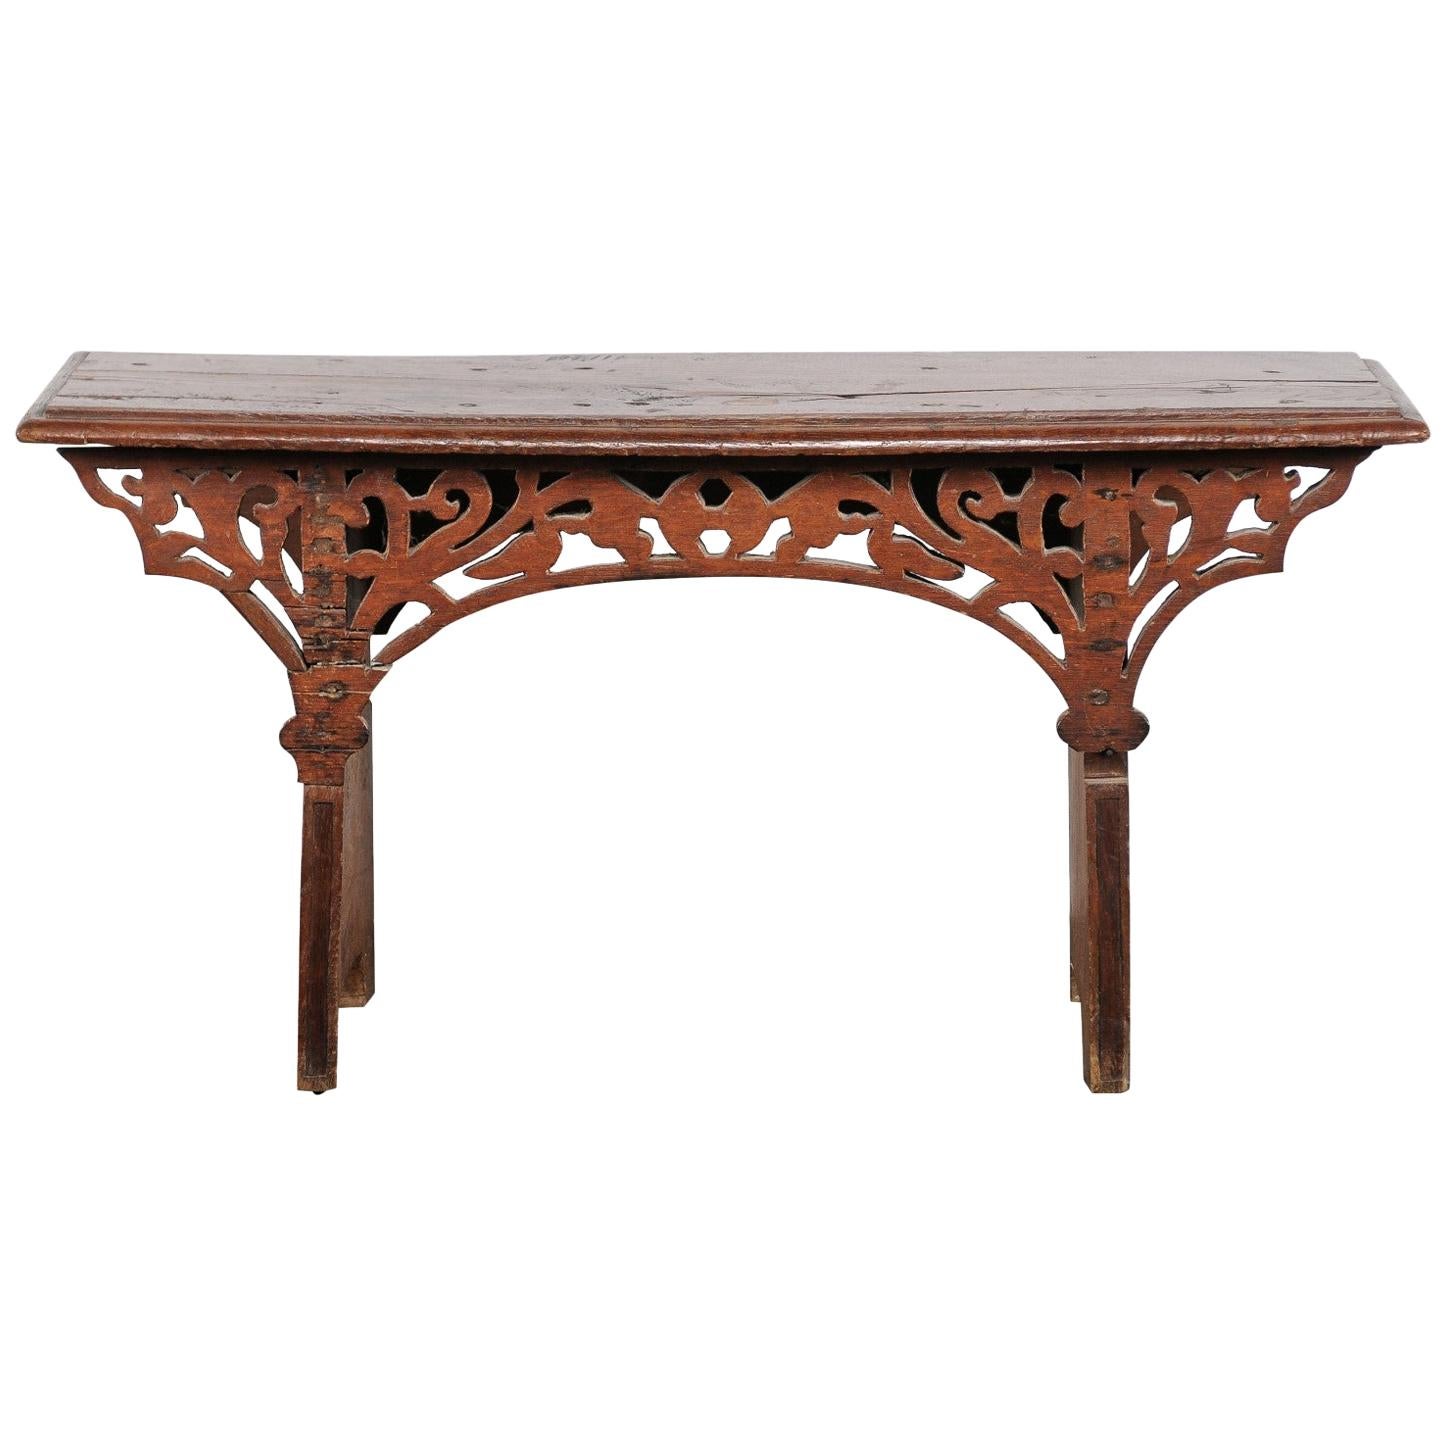 20th Century Continental Walnut Bench with Reticulated Carved Front, Labeled